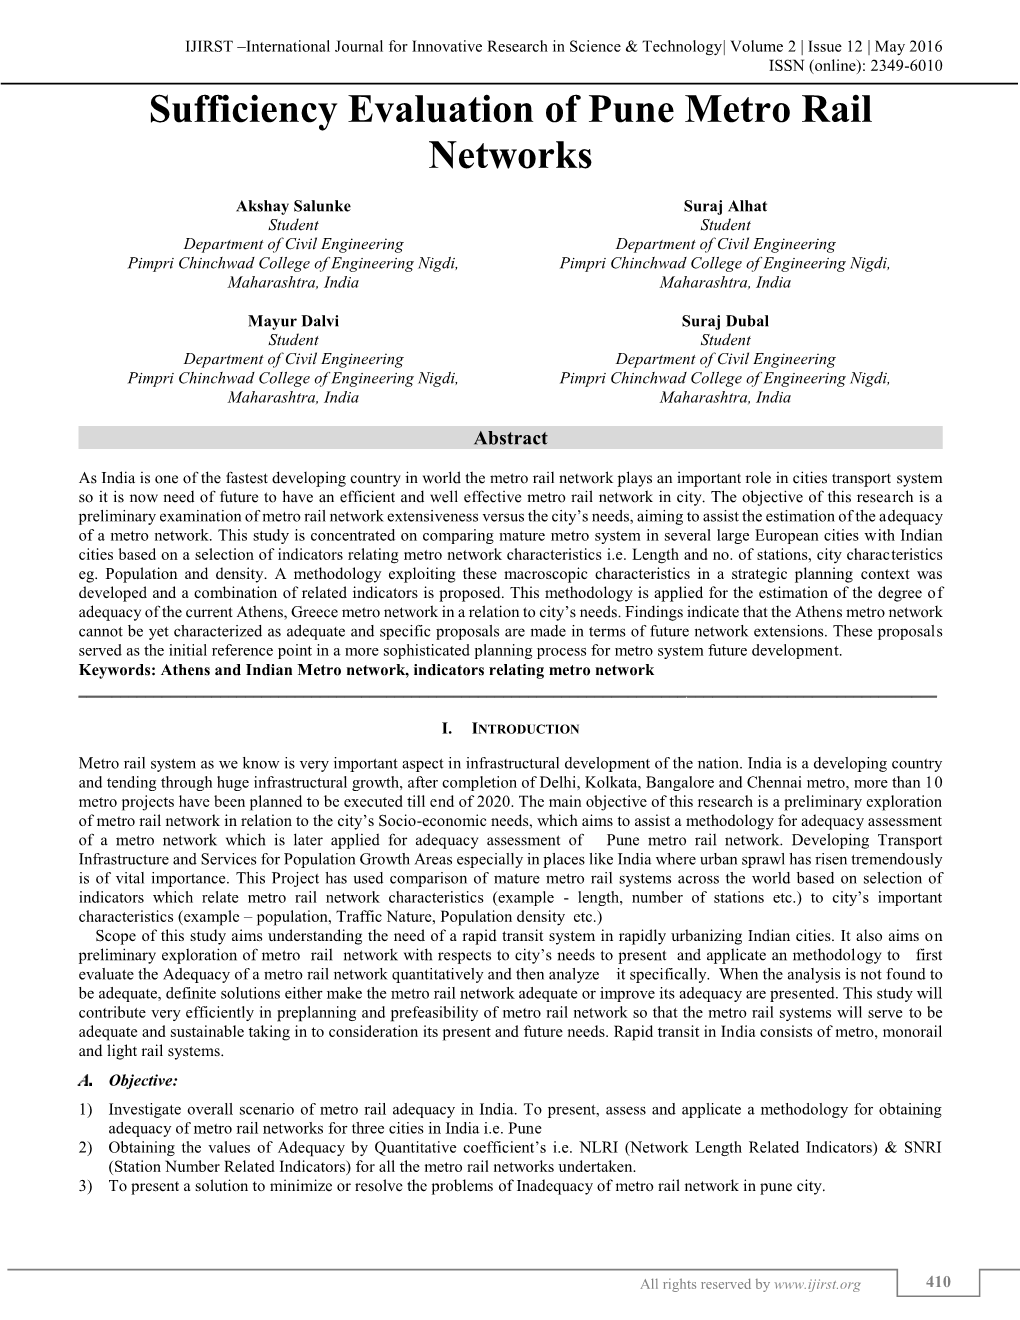 Sufficiency Evaluation of Pune Metro Rail Networks (IJIRST/ Volume 2 / Issue 12/ 071)